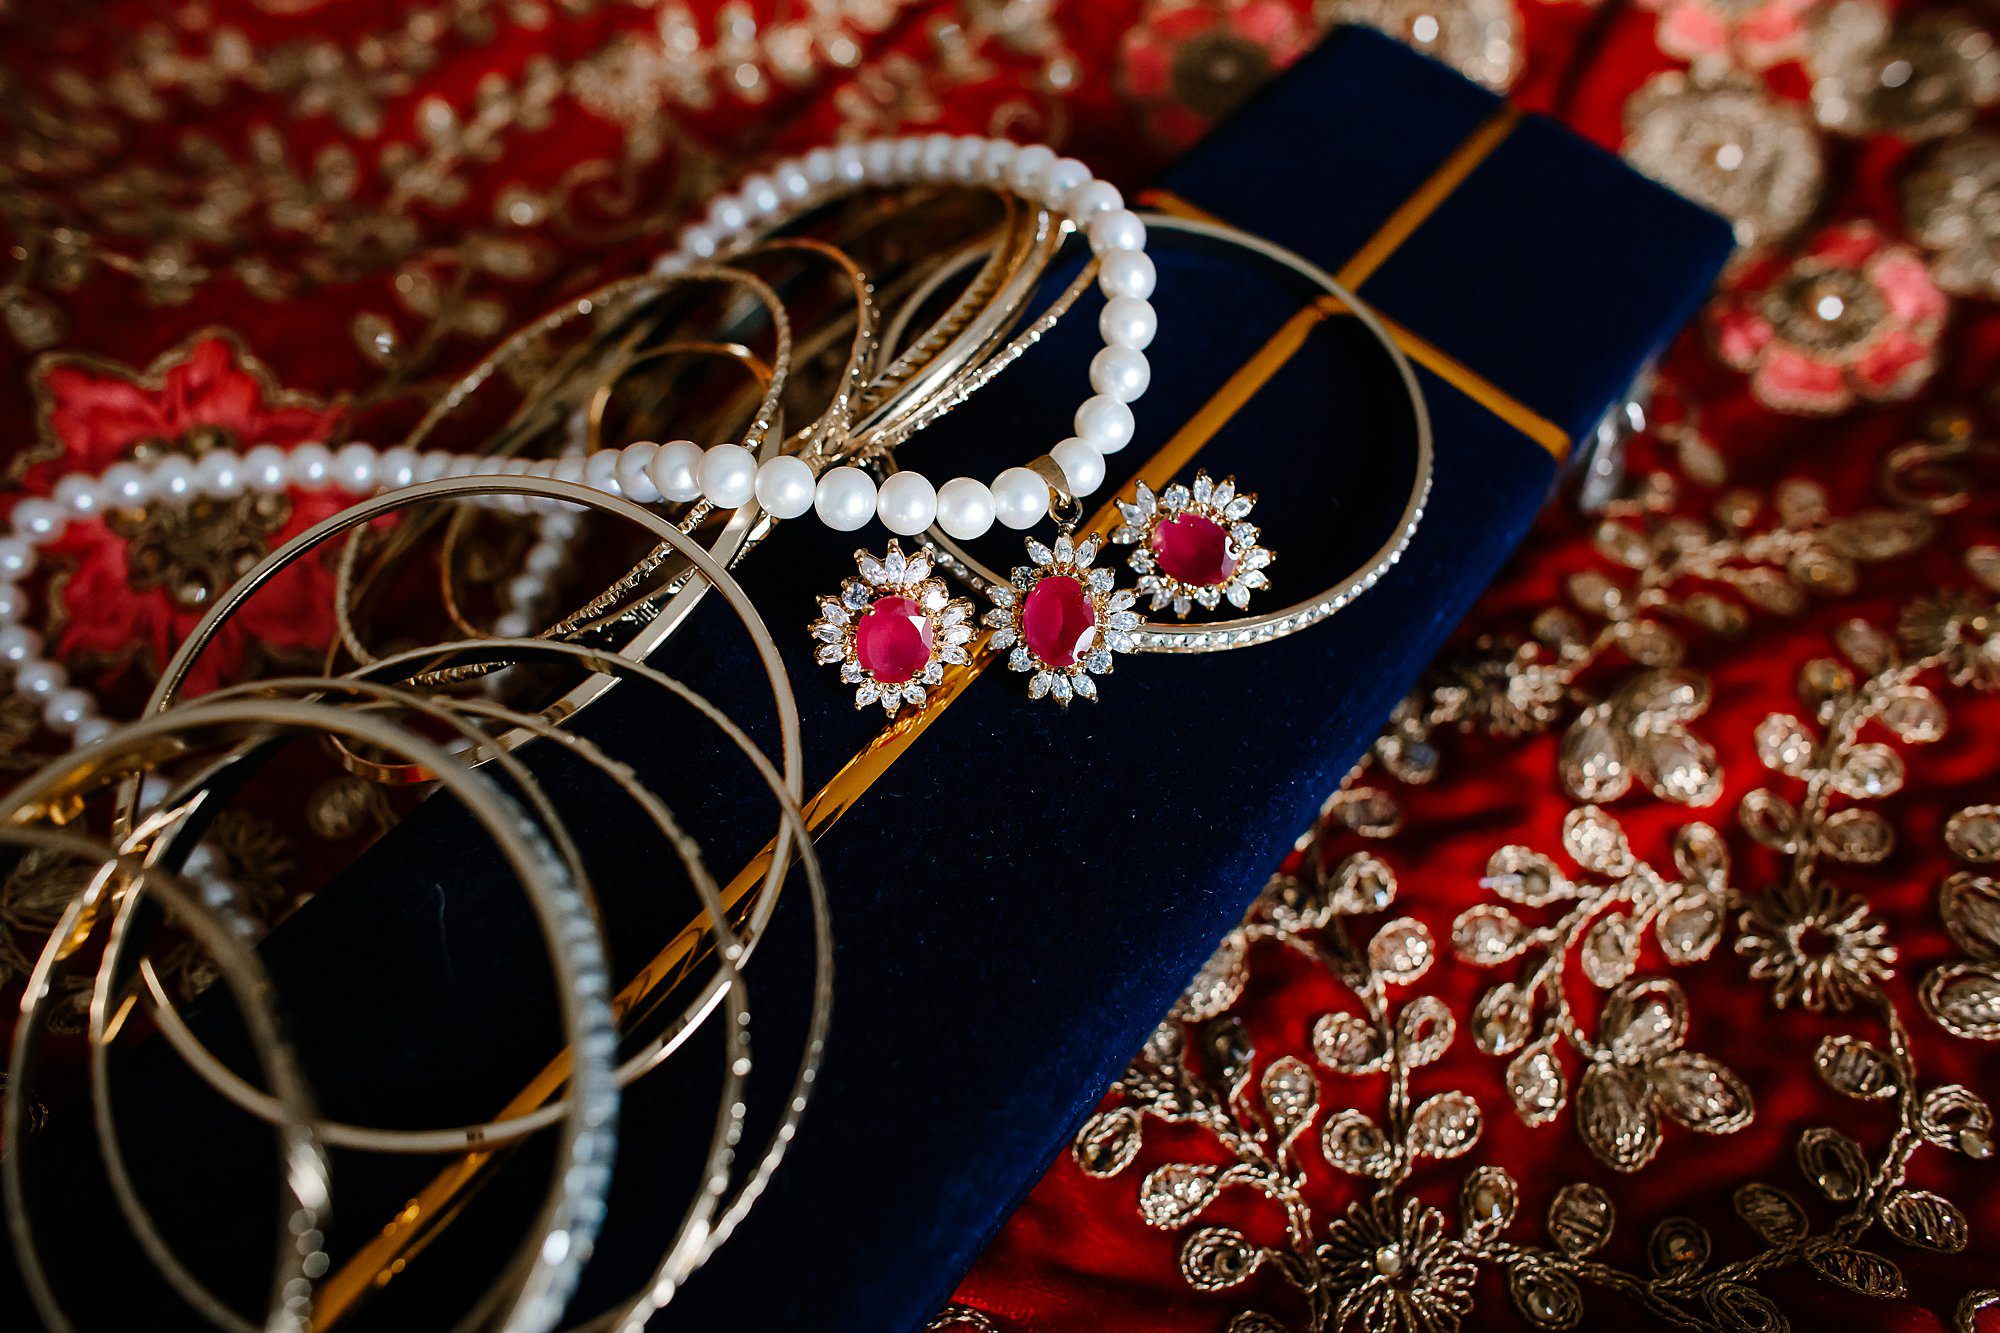 Pearl and ruby necklace with gold bangles lying on hindu saree